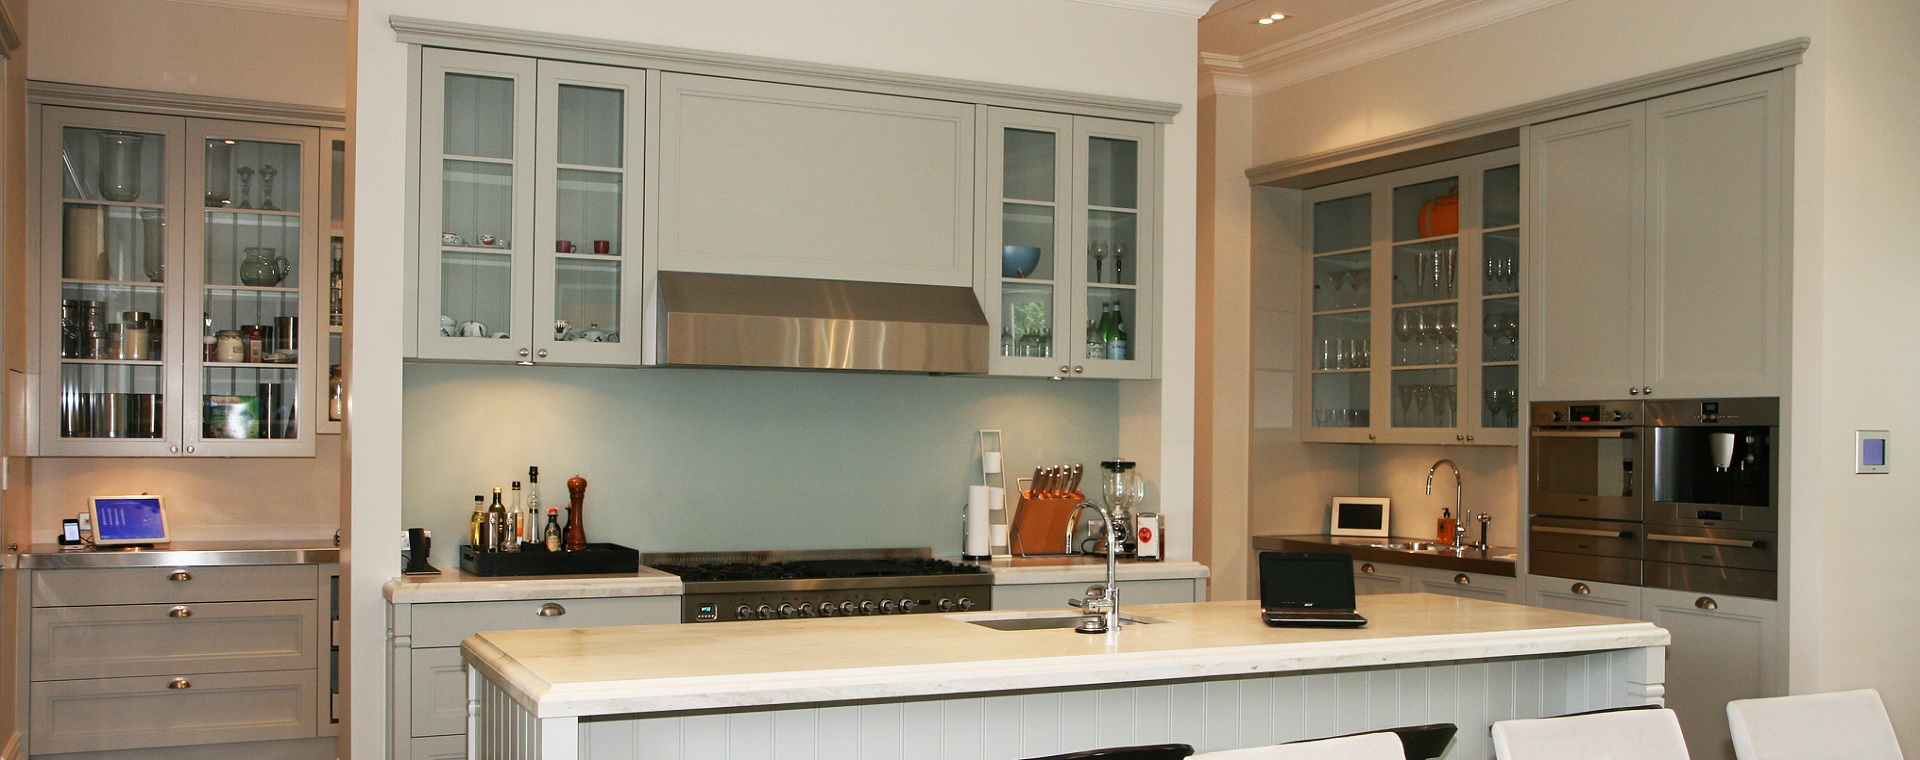 Modern kitchen with mobile touchscreens and in-wall touchscreen to control home automation and entertainment